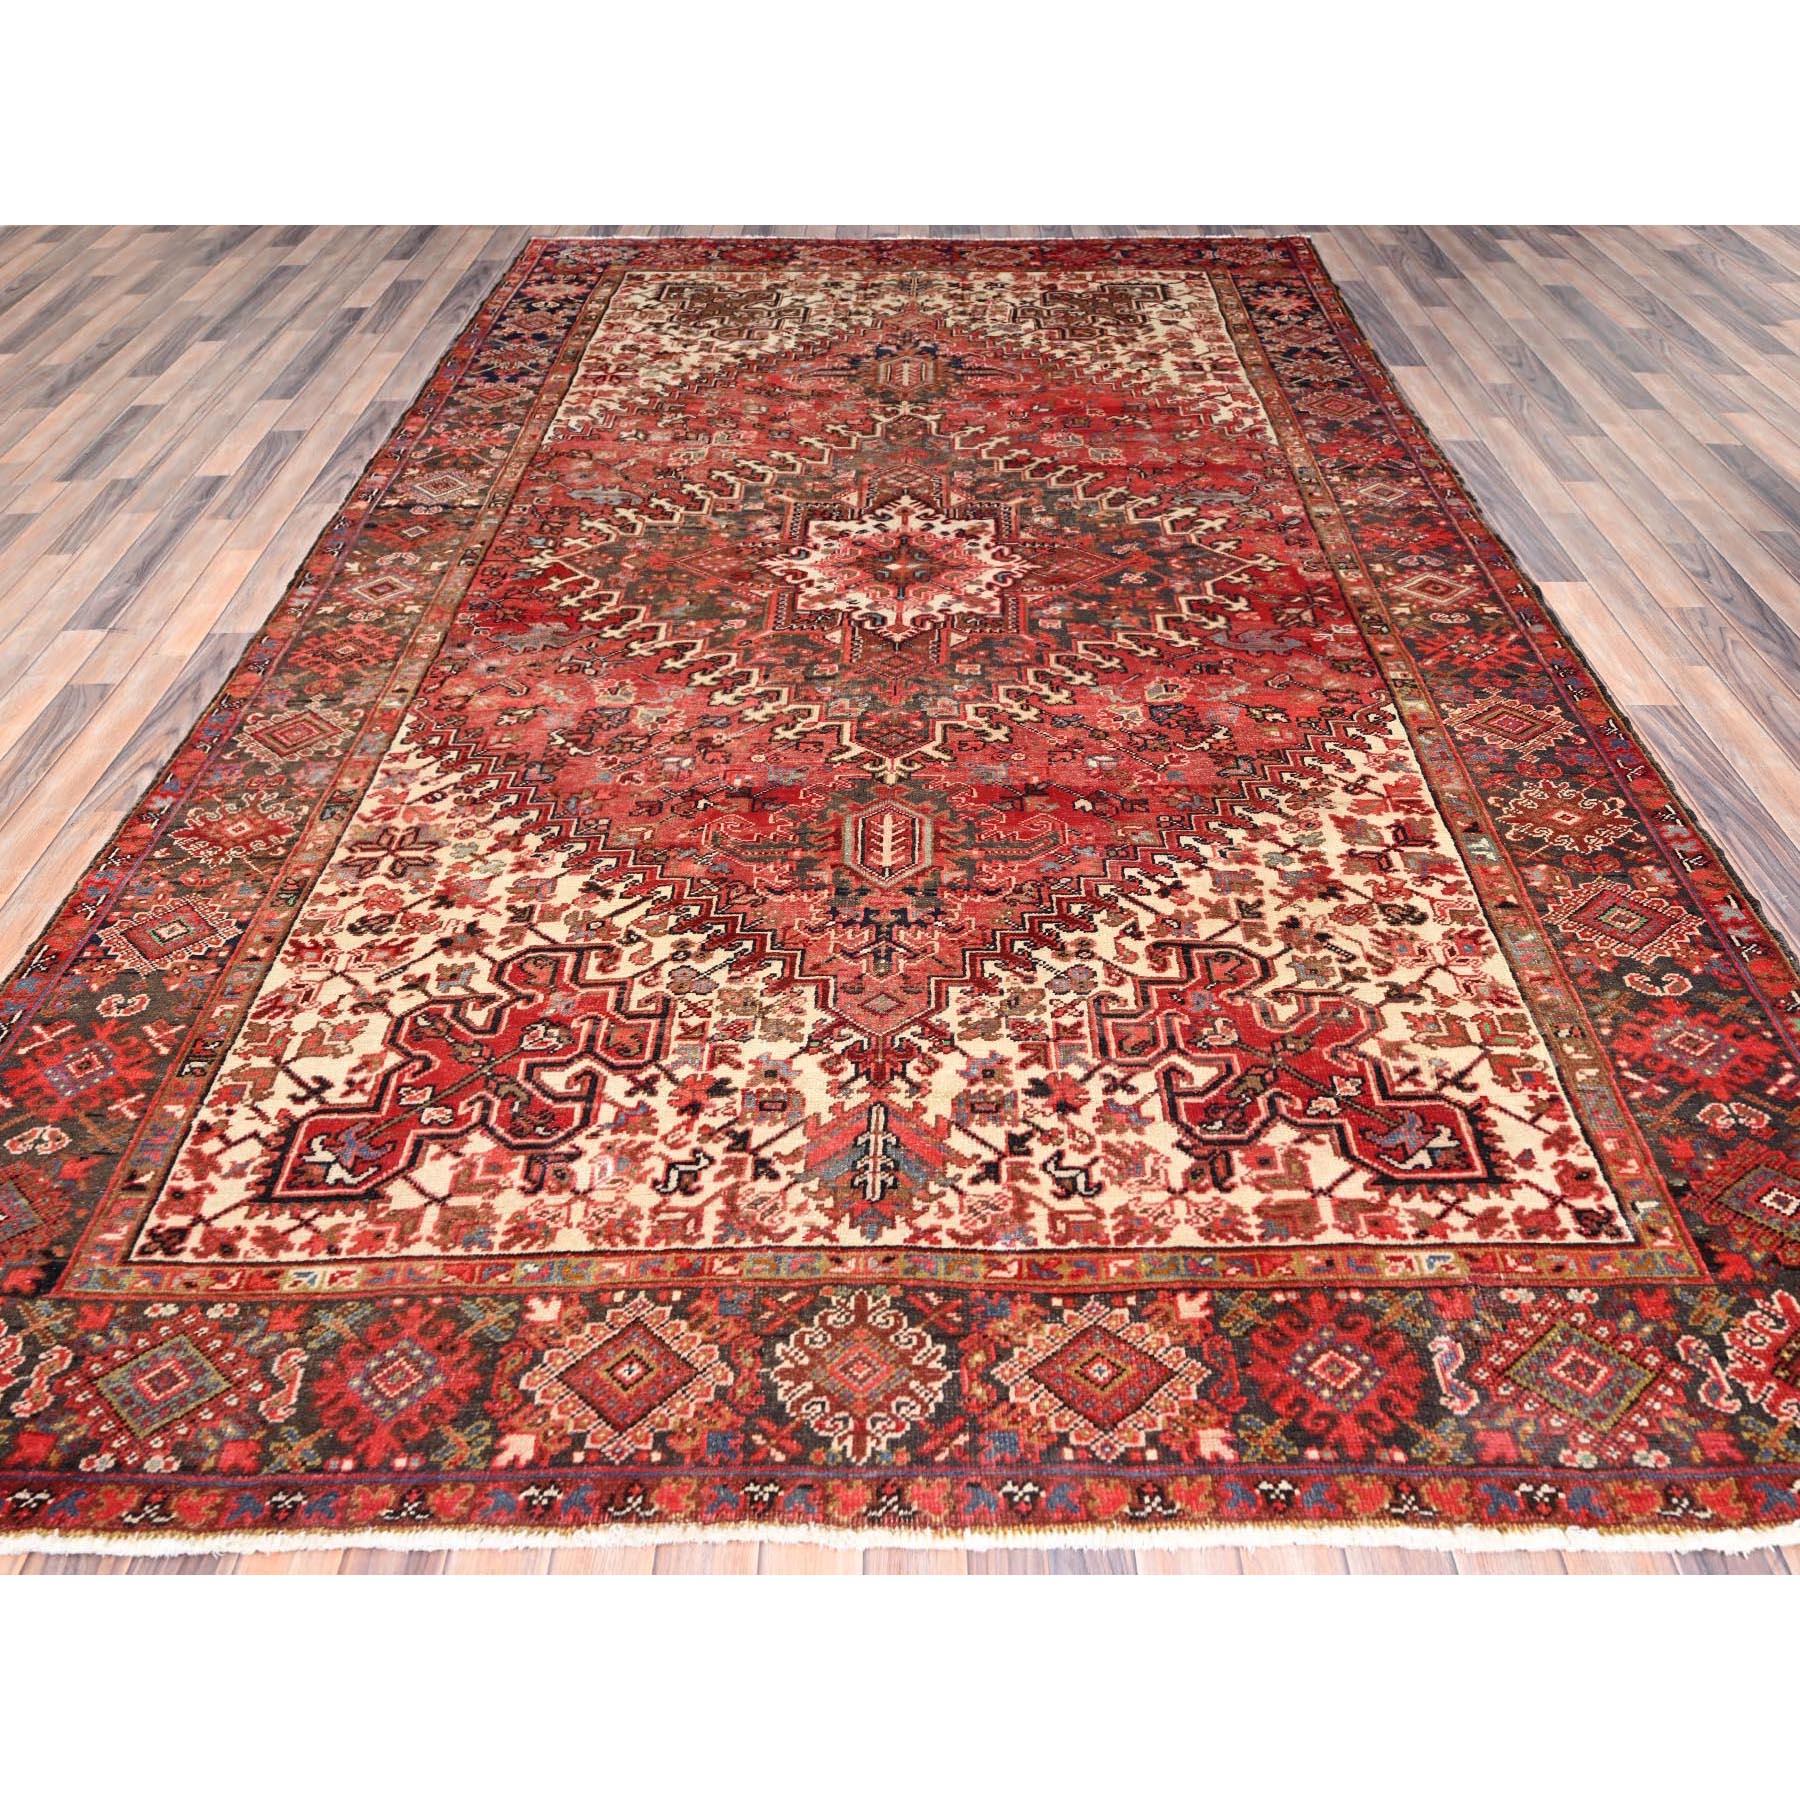 Medieval Red Vintage Persian Heriz Geometric Flower Design Hand Knotted Organic Wool Rug For Sale